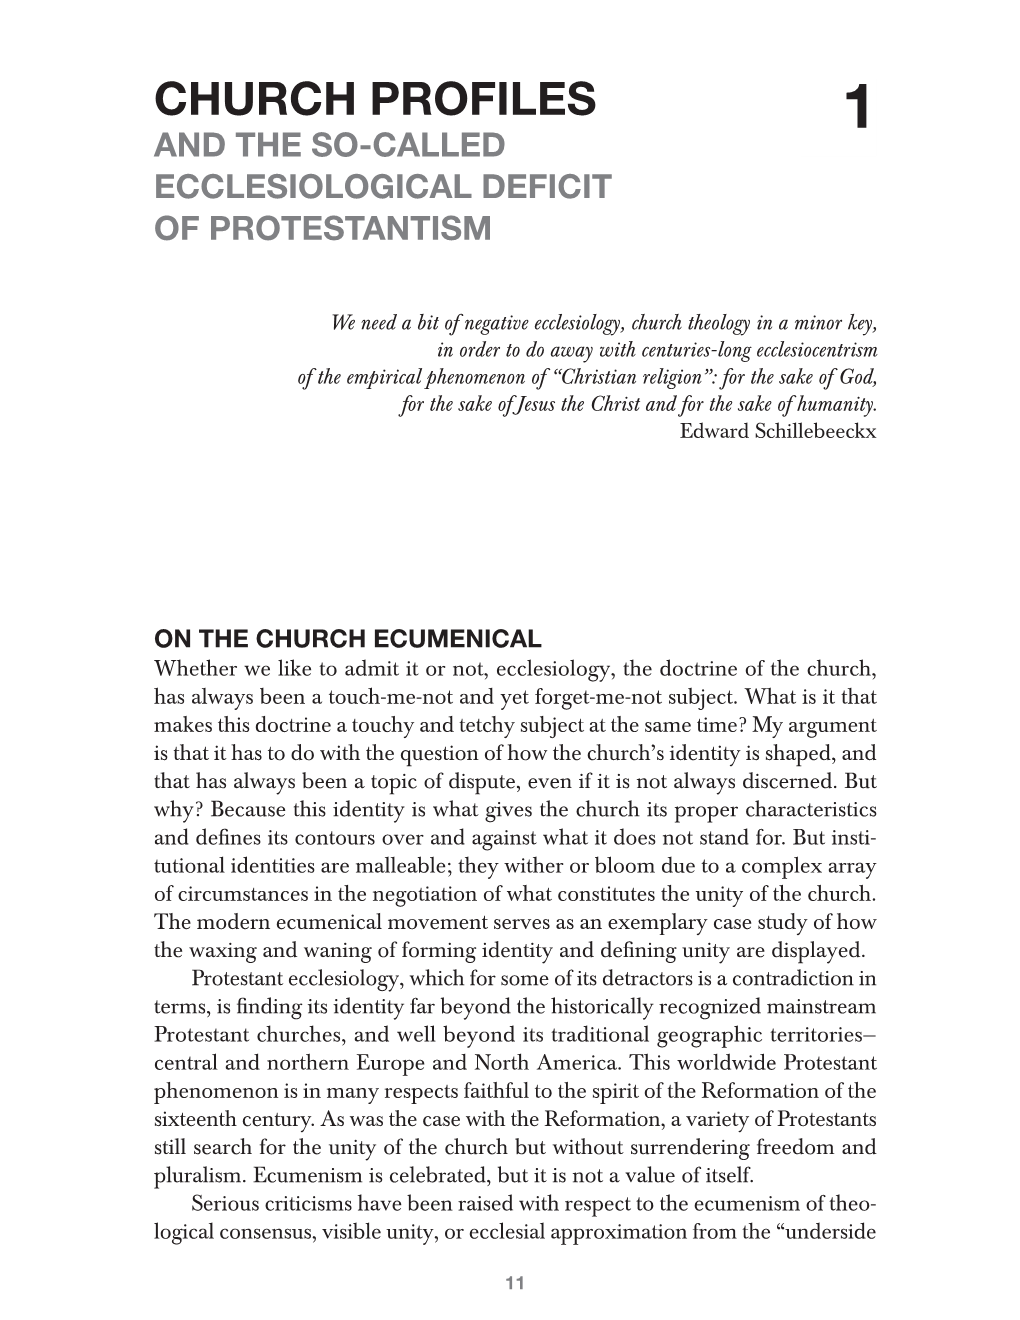 Church Profiles 1 and the So-Called Ecclesiological Deficit of Protestantism